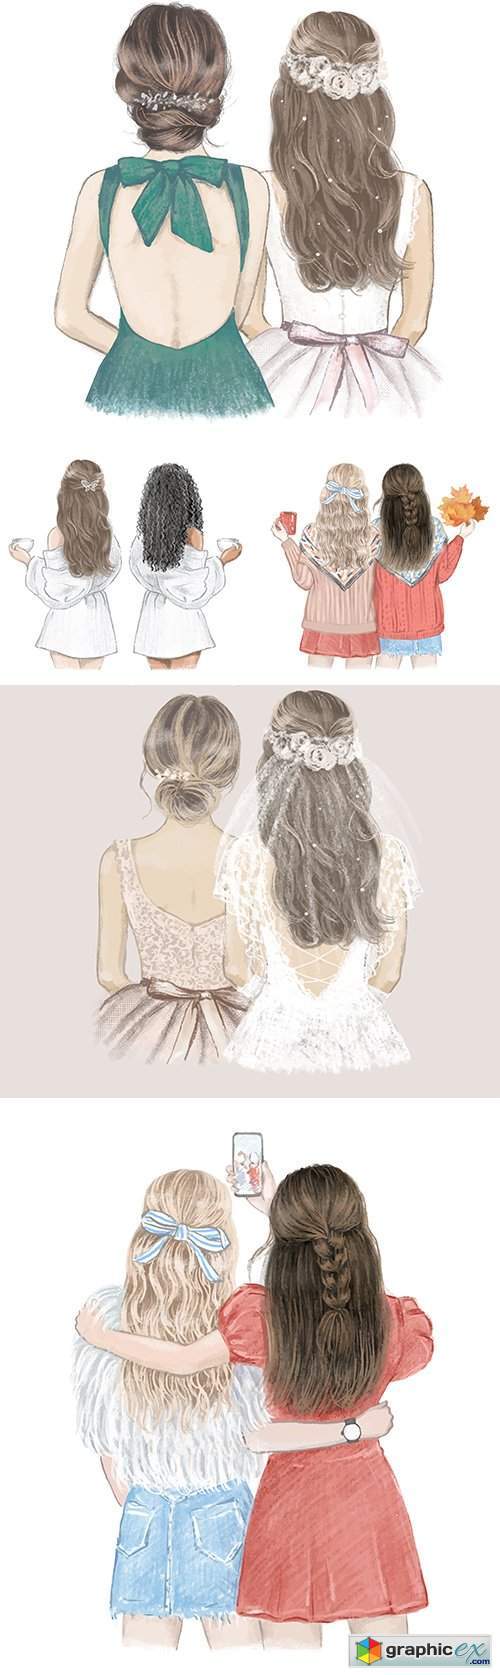 Girls with a beautiful hairstyle turned back illustration